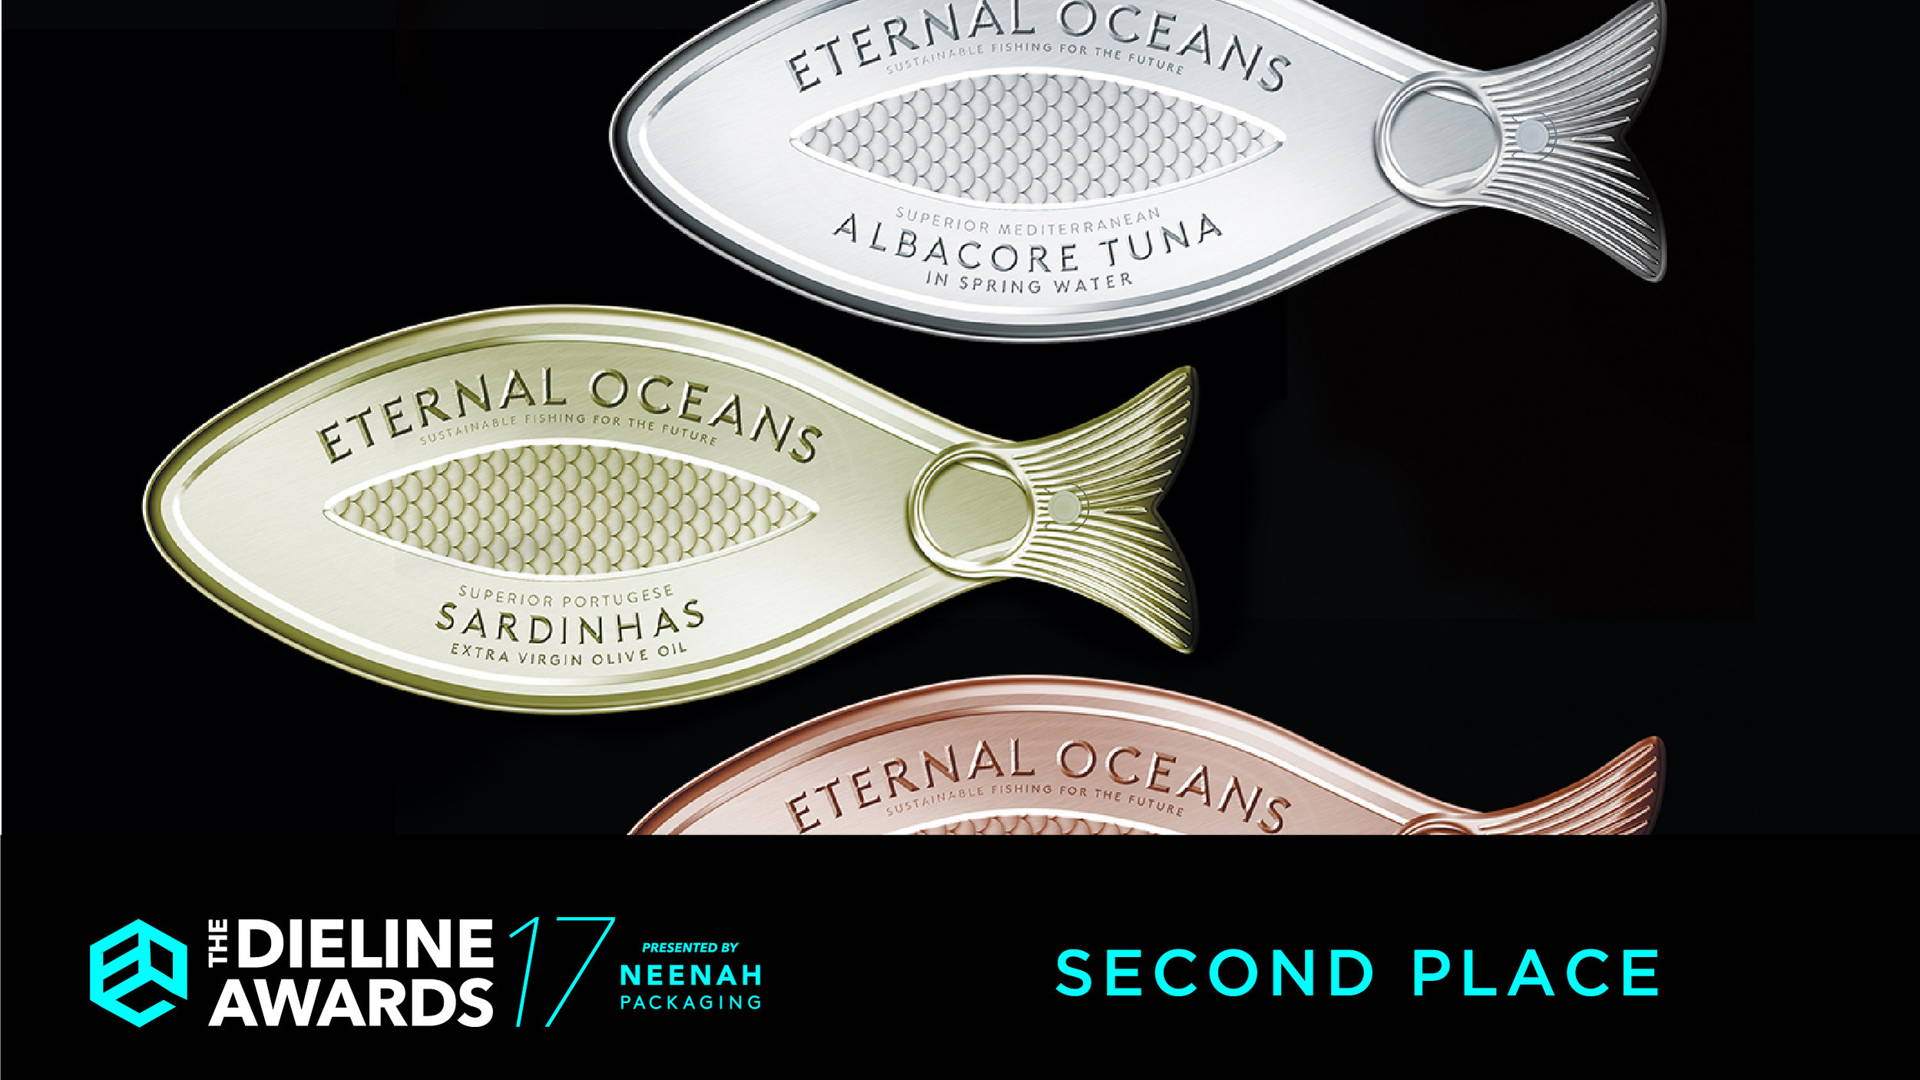 Featured image for The Dieline Awards 2017: Eternal Oceans